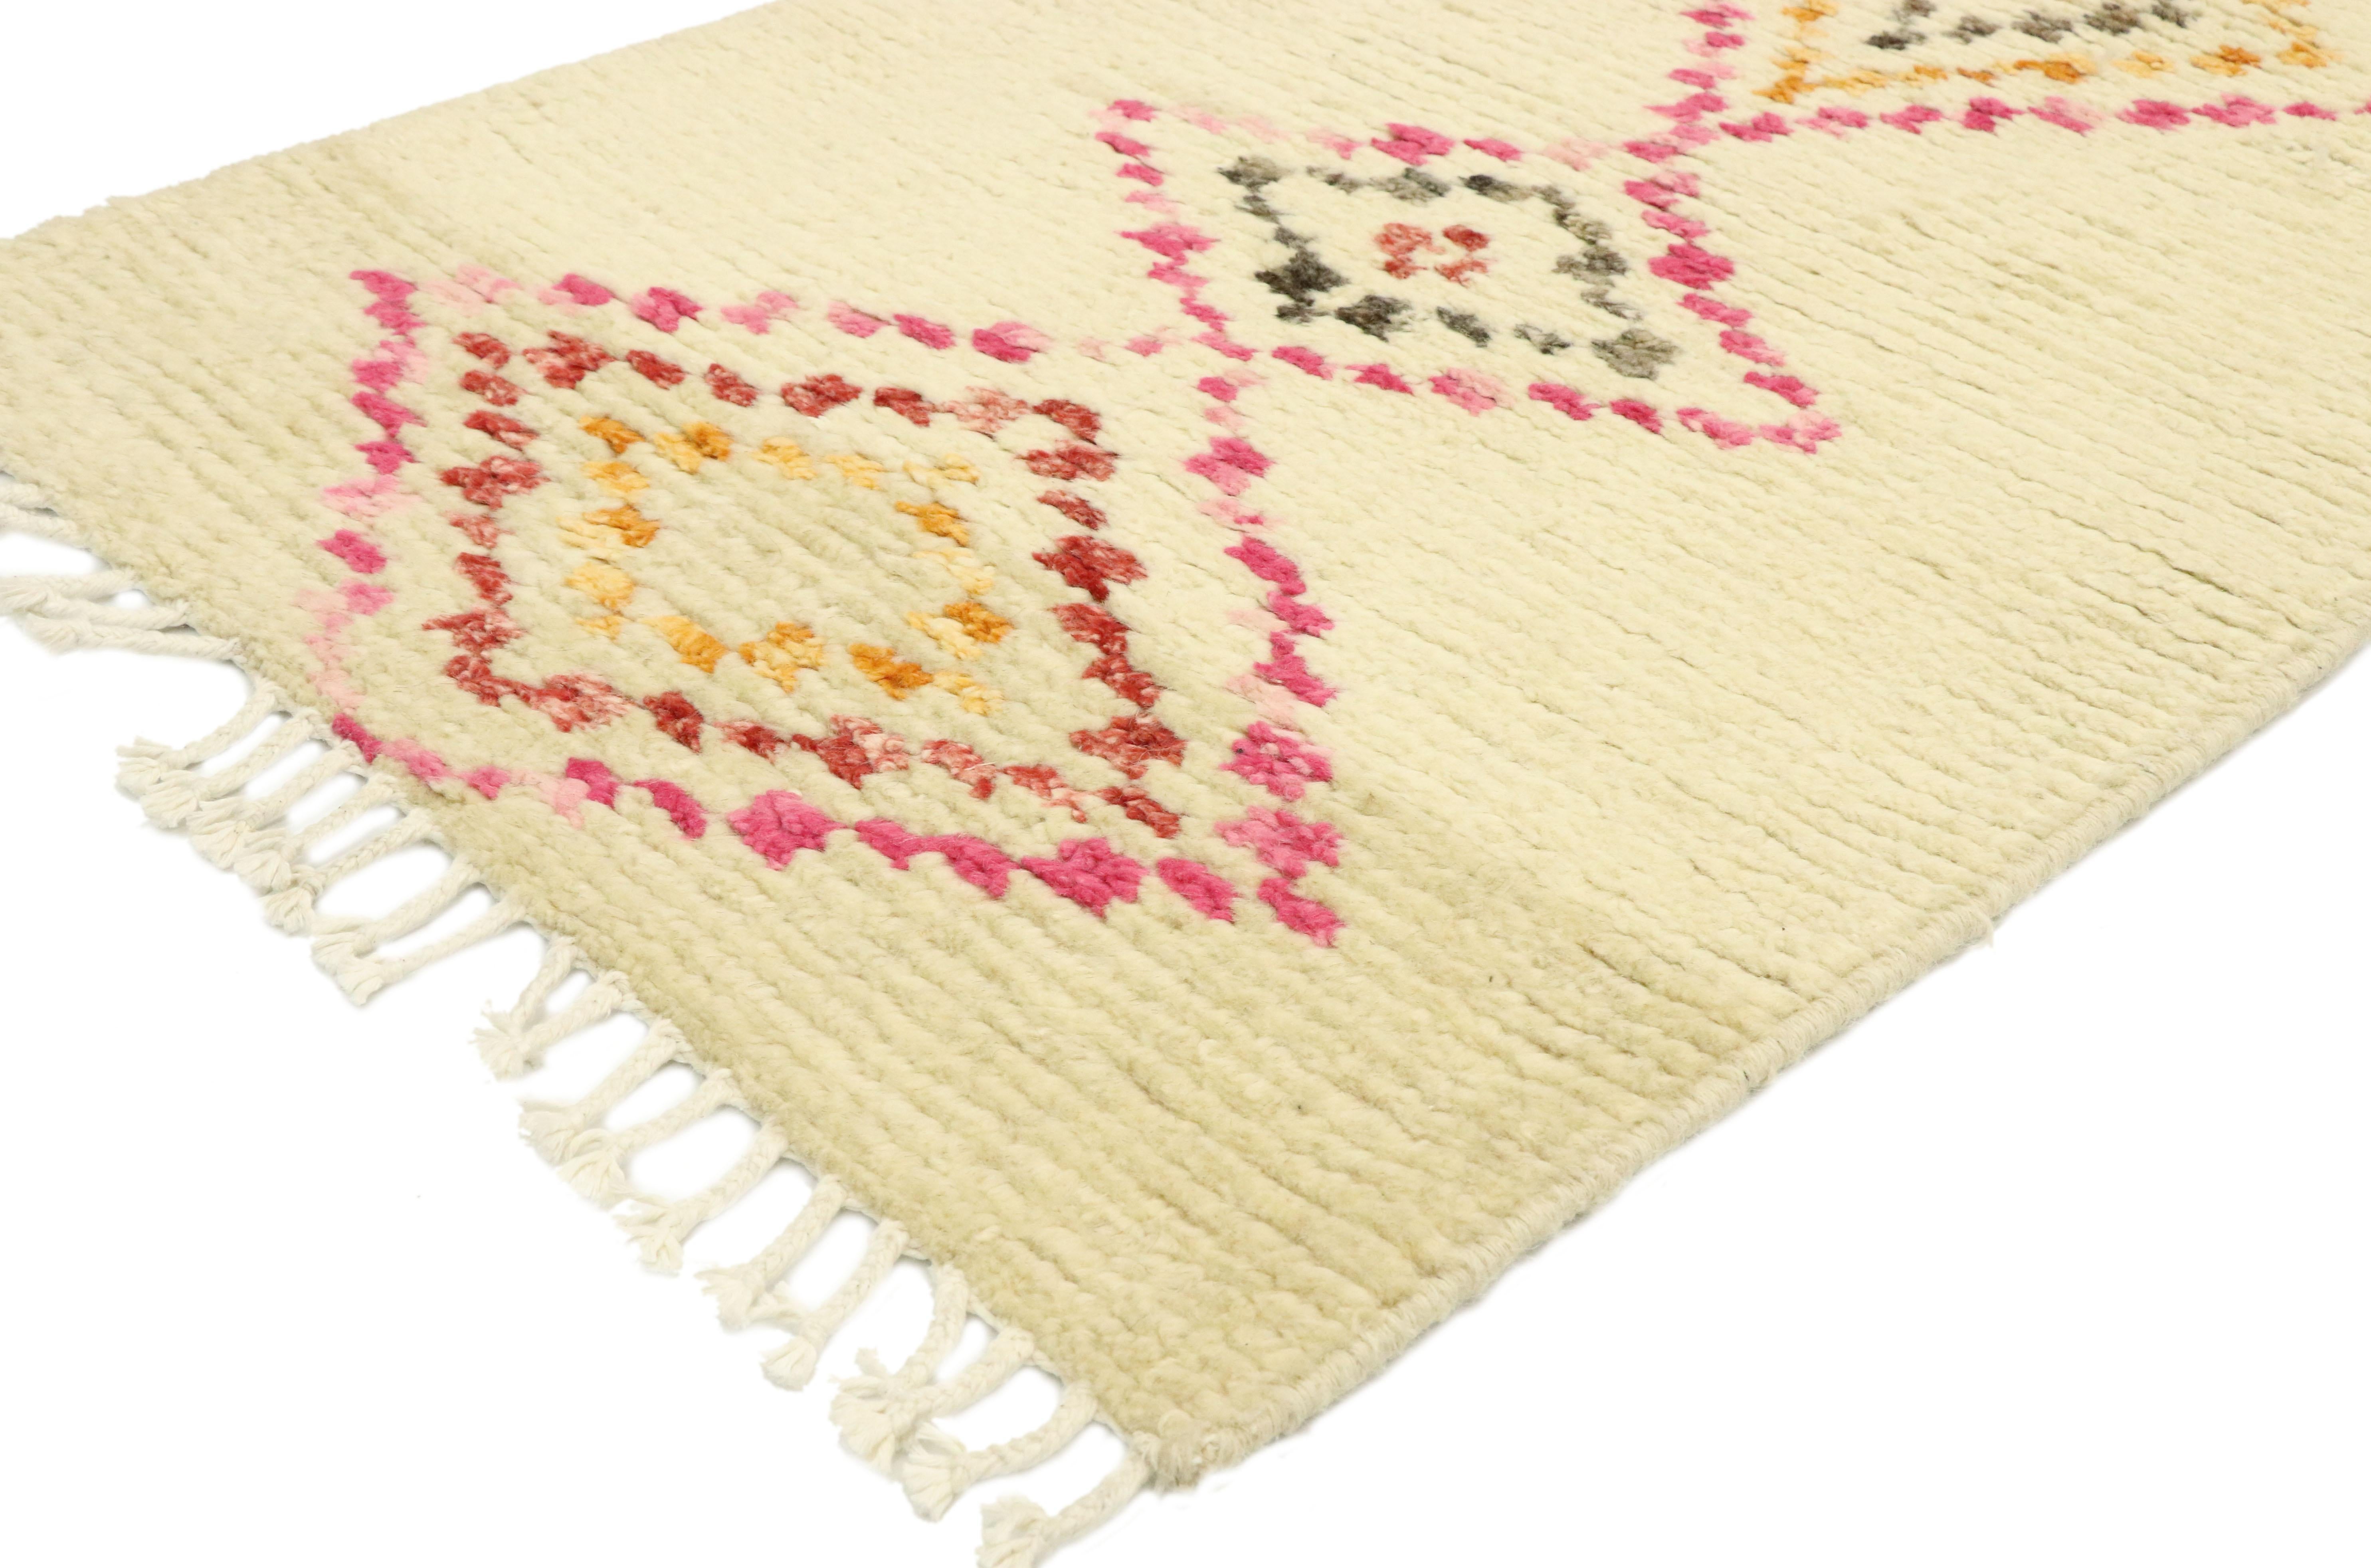 80609 Colorful Boho Moroccan Rug Runner, 02'06 x 12'01. 
Boho Jungalow meets Southwest Desert in this hand knotted wool colorful Moroccan rug. The intrinsic diamond design and happy hues woven into this piece work creating a modern yet cozy feeling.